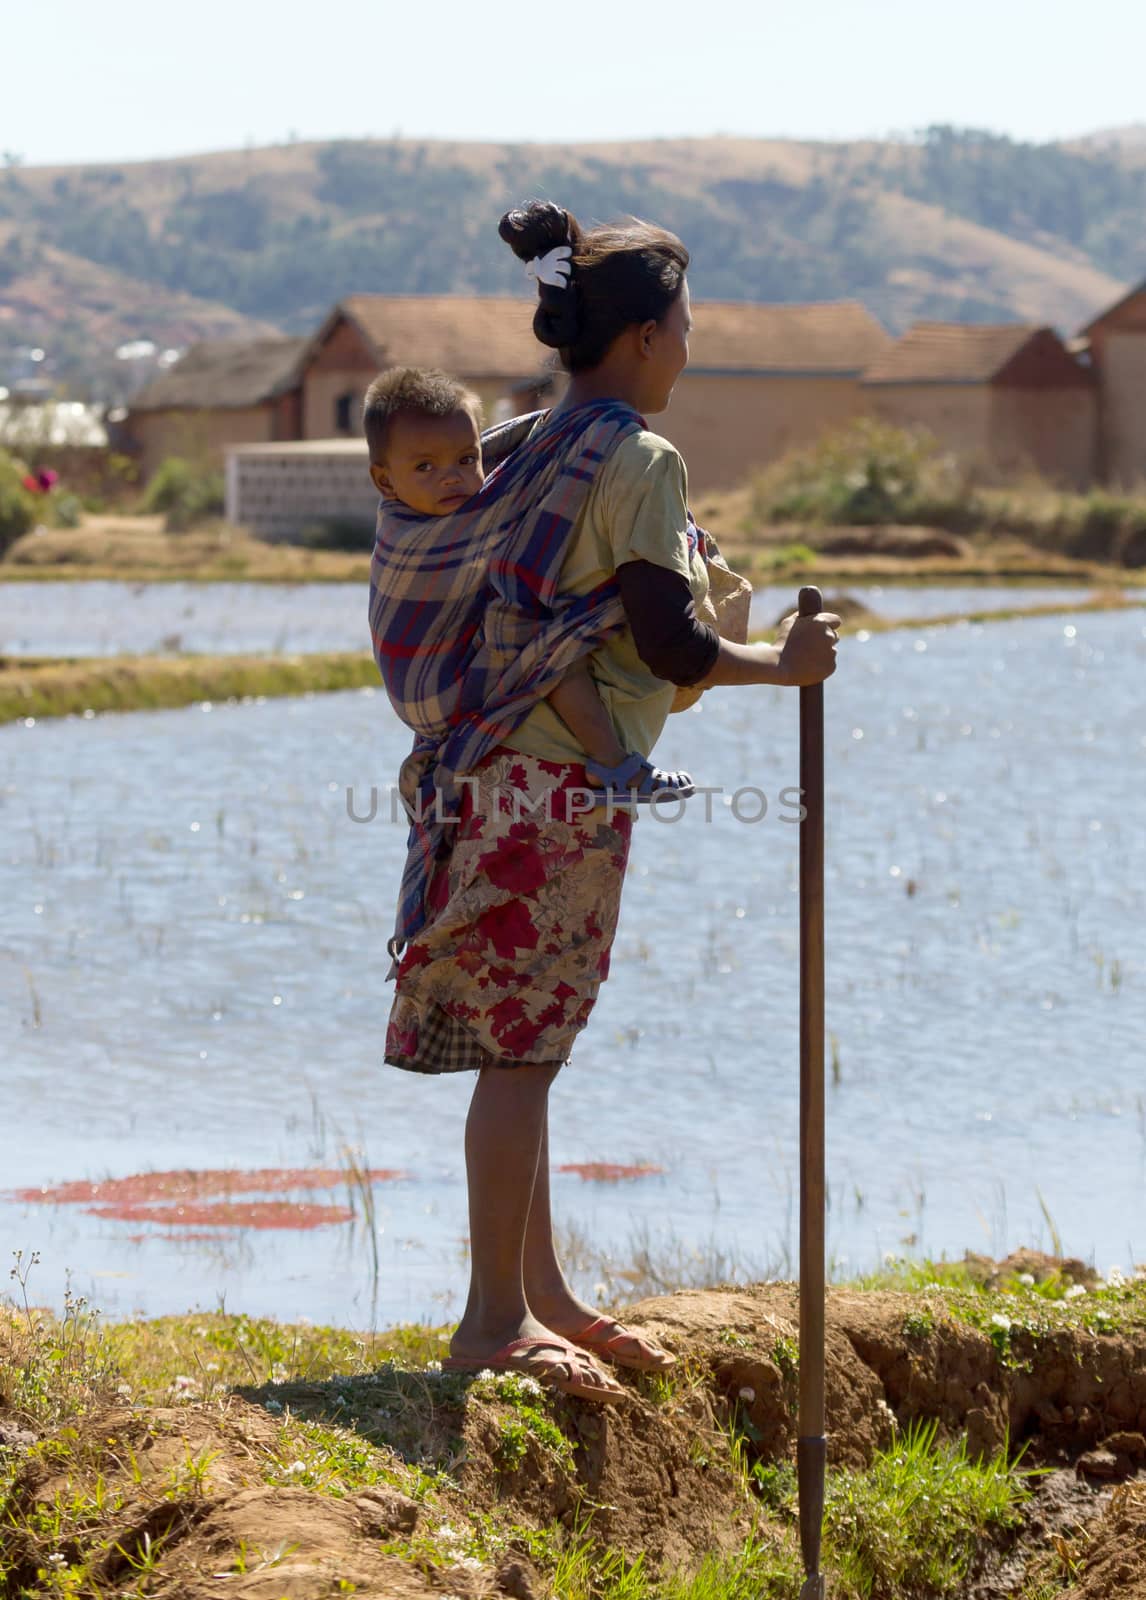 Fiadanana, Madagascar on july 26, 2019 - Woman with child working on a field in Madagascar. Food for over 25 million Malagasy people, Antsirabe, Madagascar